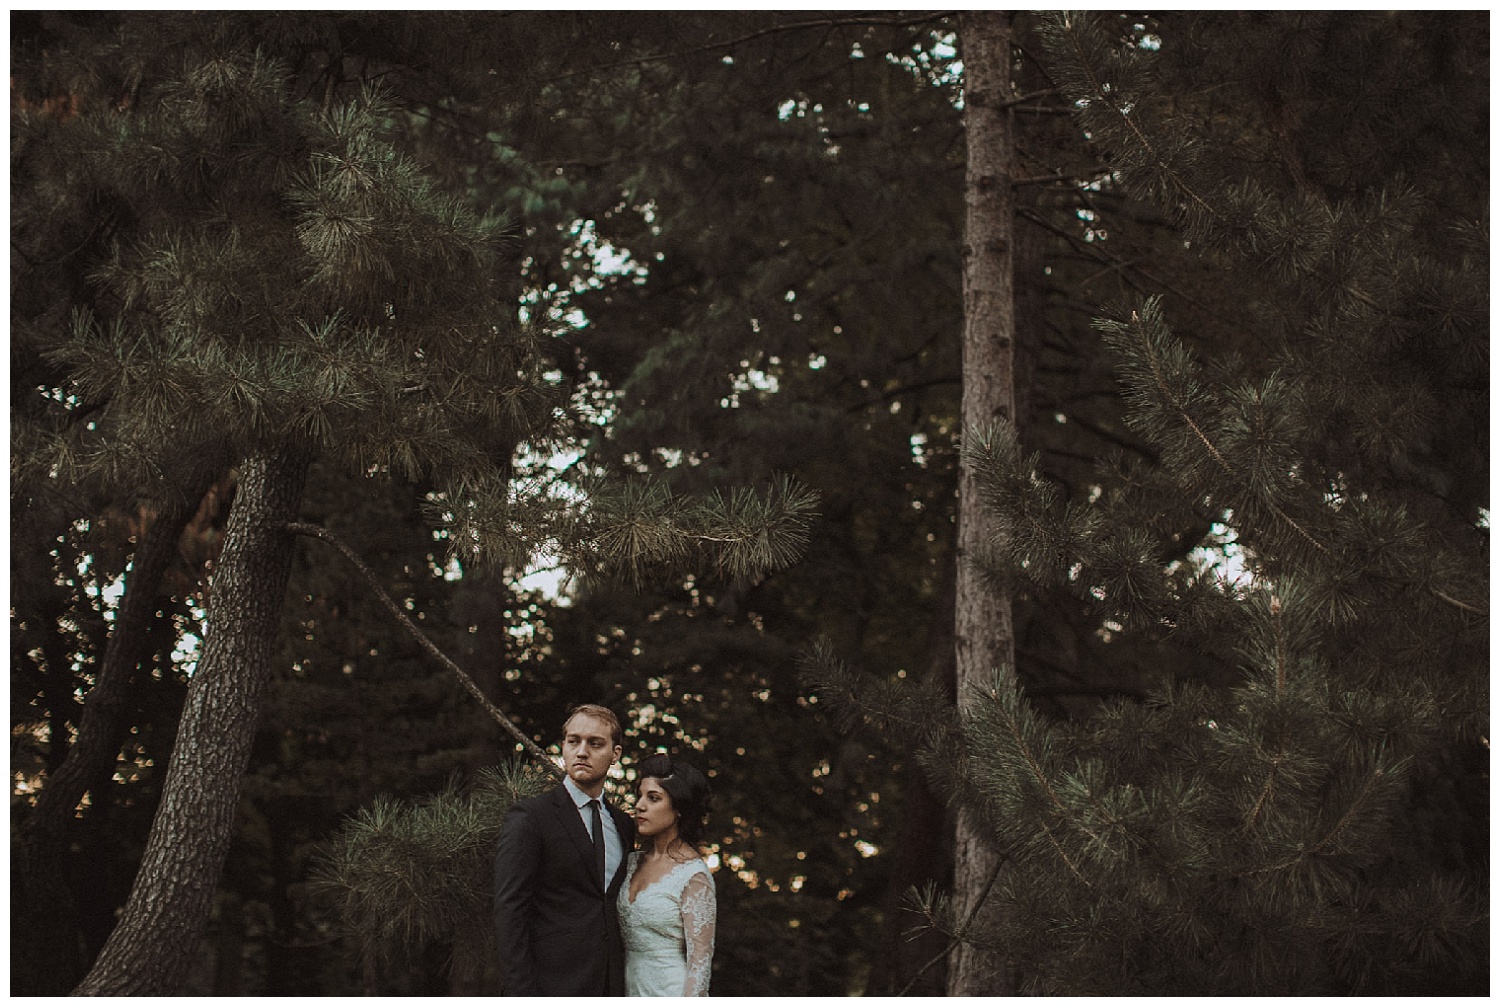 Elopement in Central Park NYC